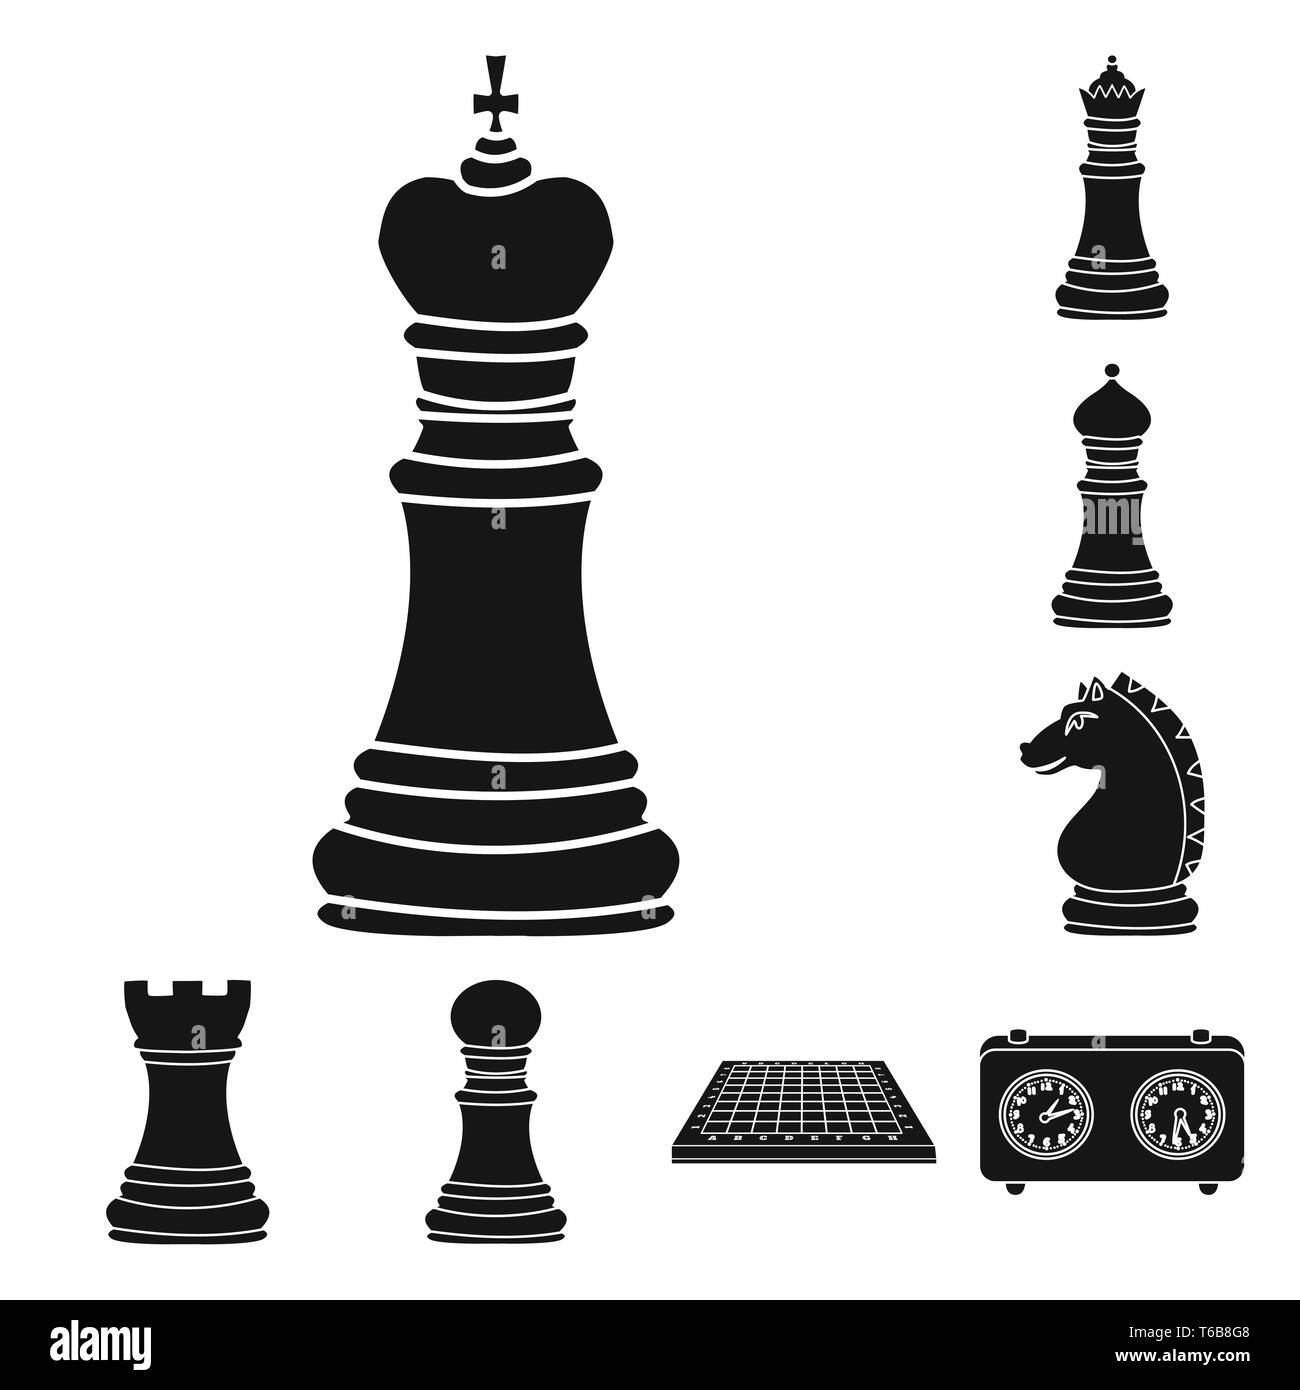 king,queen,bishop,knight,rook,pawn,chessboard,clock,board,strategic,horse,timer,white,championship,castle,checkerboard,speed,business,mate,tower,figure,empty,leadership,check,head,network,counter,table,club,target,chess,game,piece,strategy,tactical,play,checkmate,thin,set,vector,icon,illustration,isolated,collection,design,element,graphic,sign,black,simple Vector Vectors , Stock Vector